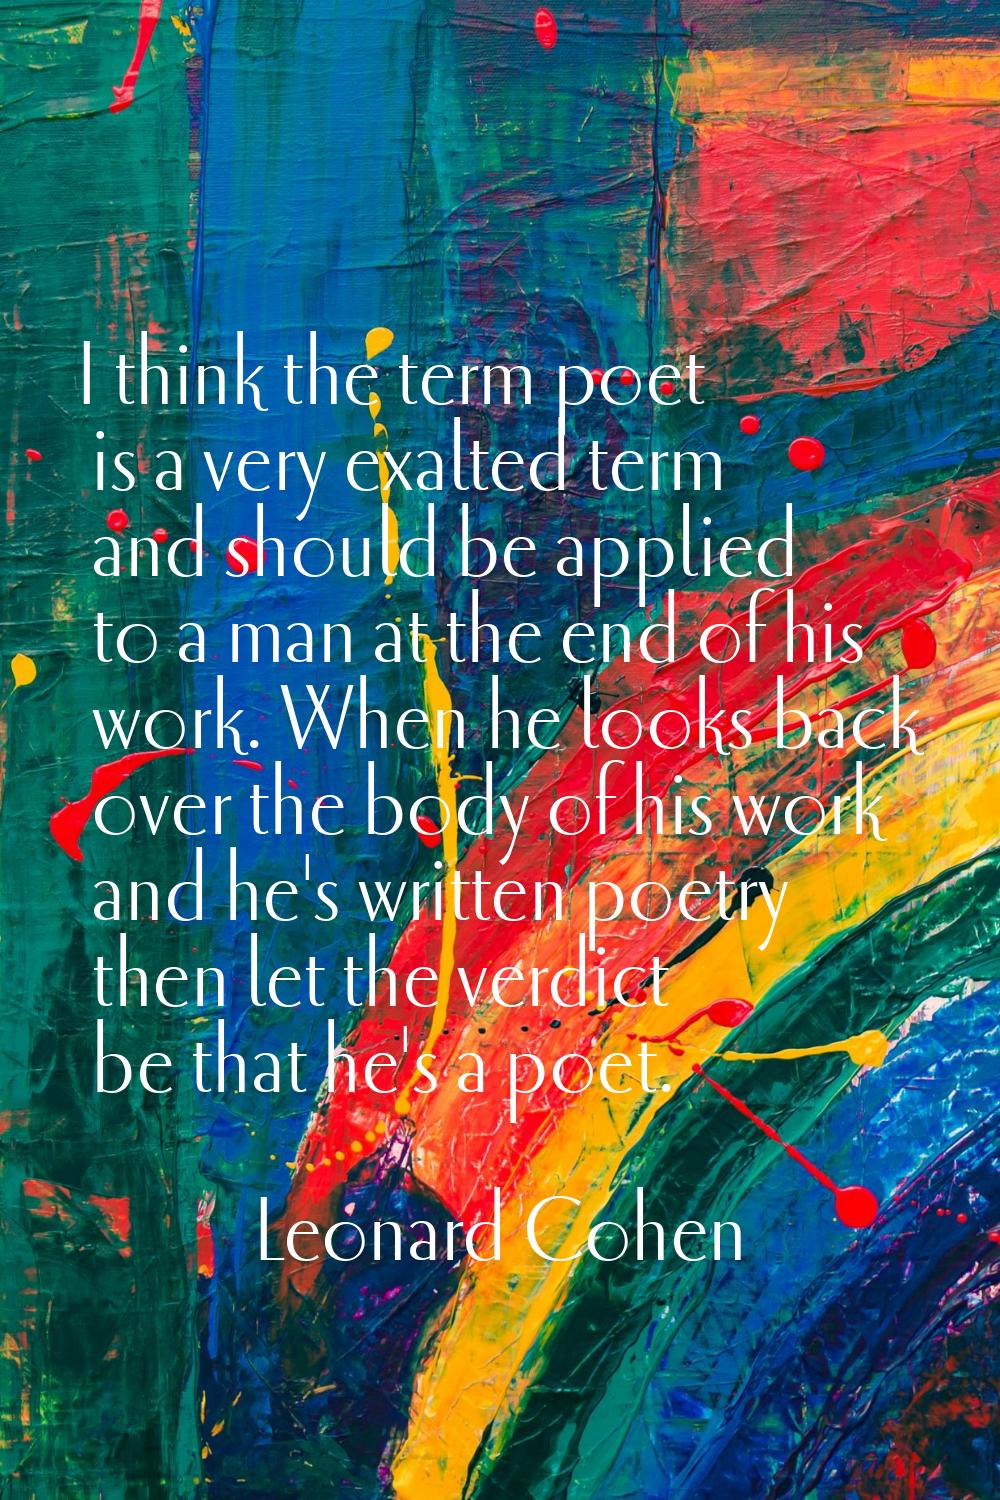 I think the term poet is a very exalted term and should be applied to a man at the end of his work.